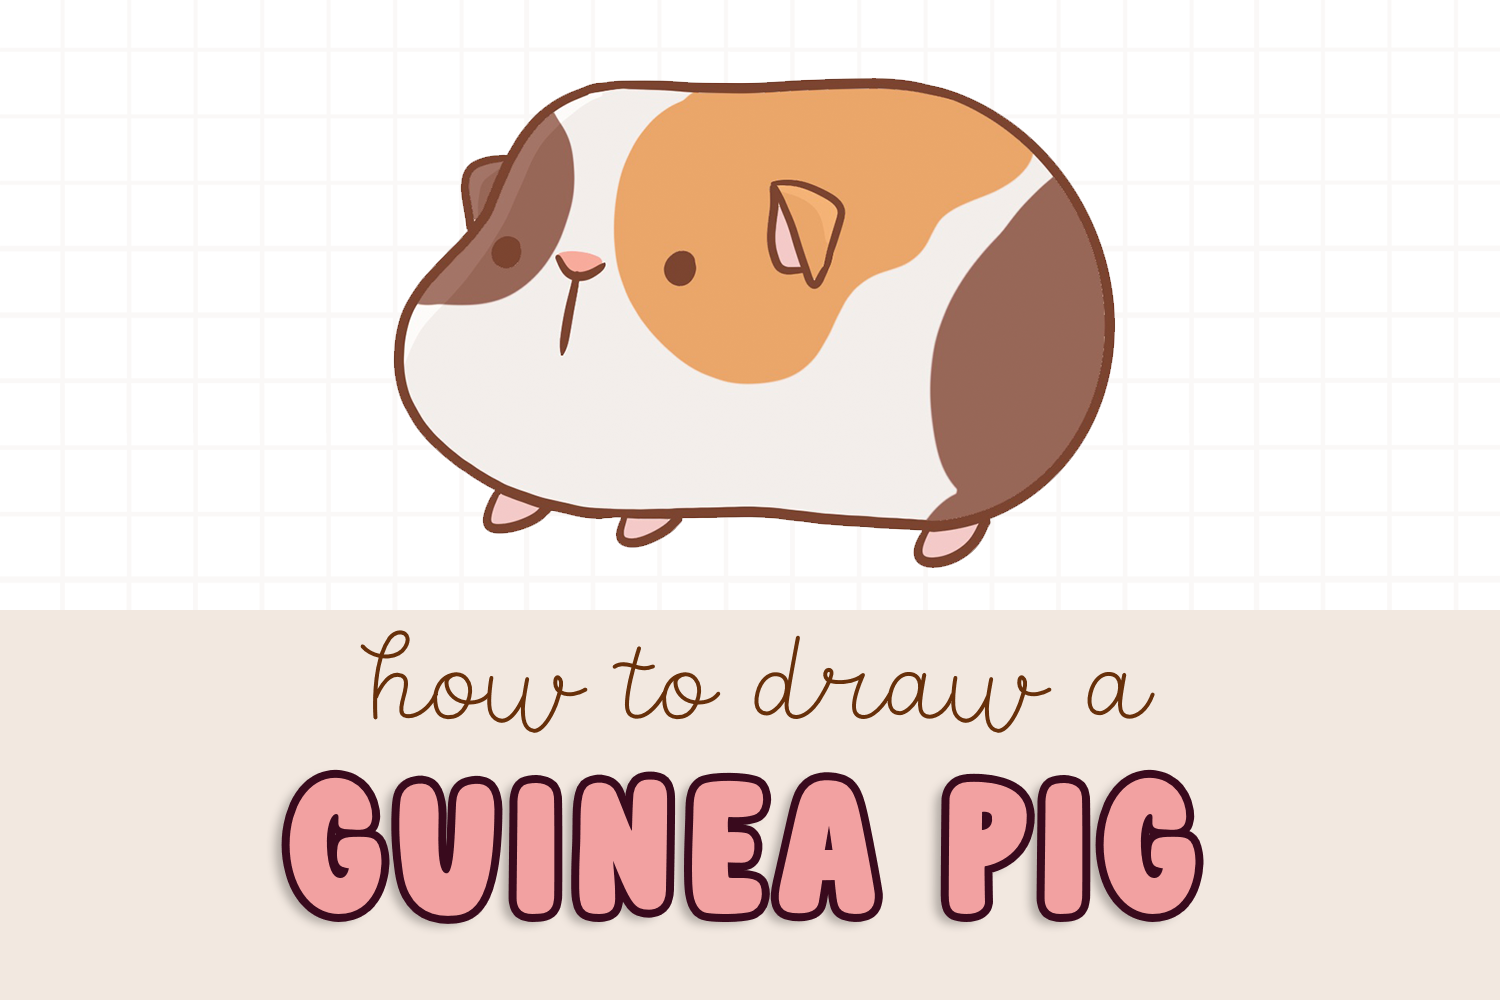 Free Abyssinian Guinea Pig Photos and Vectors